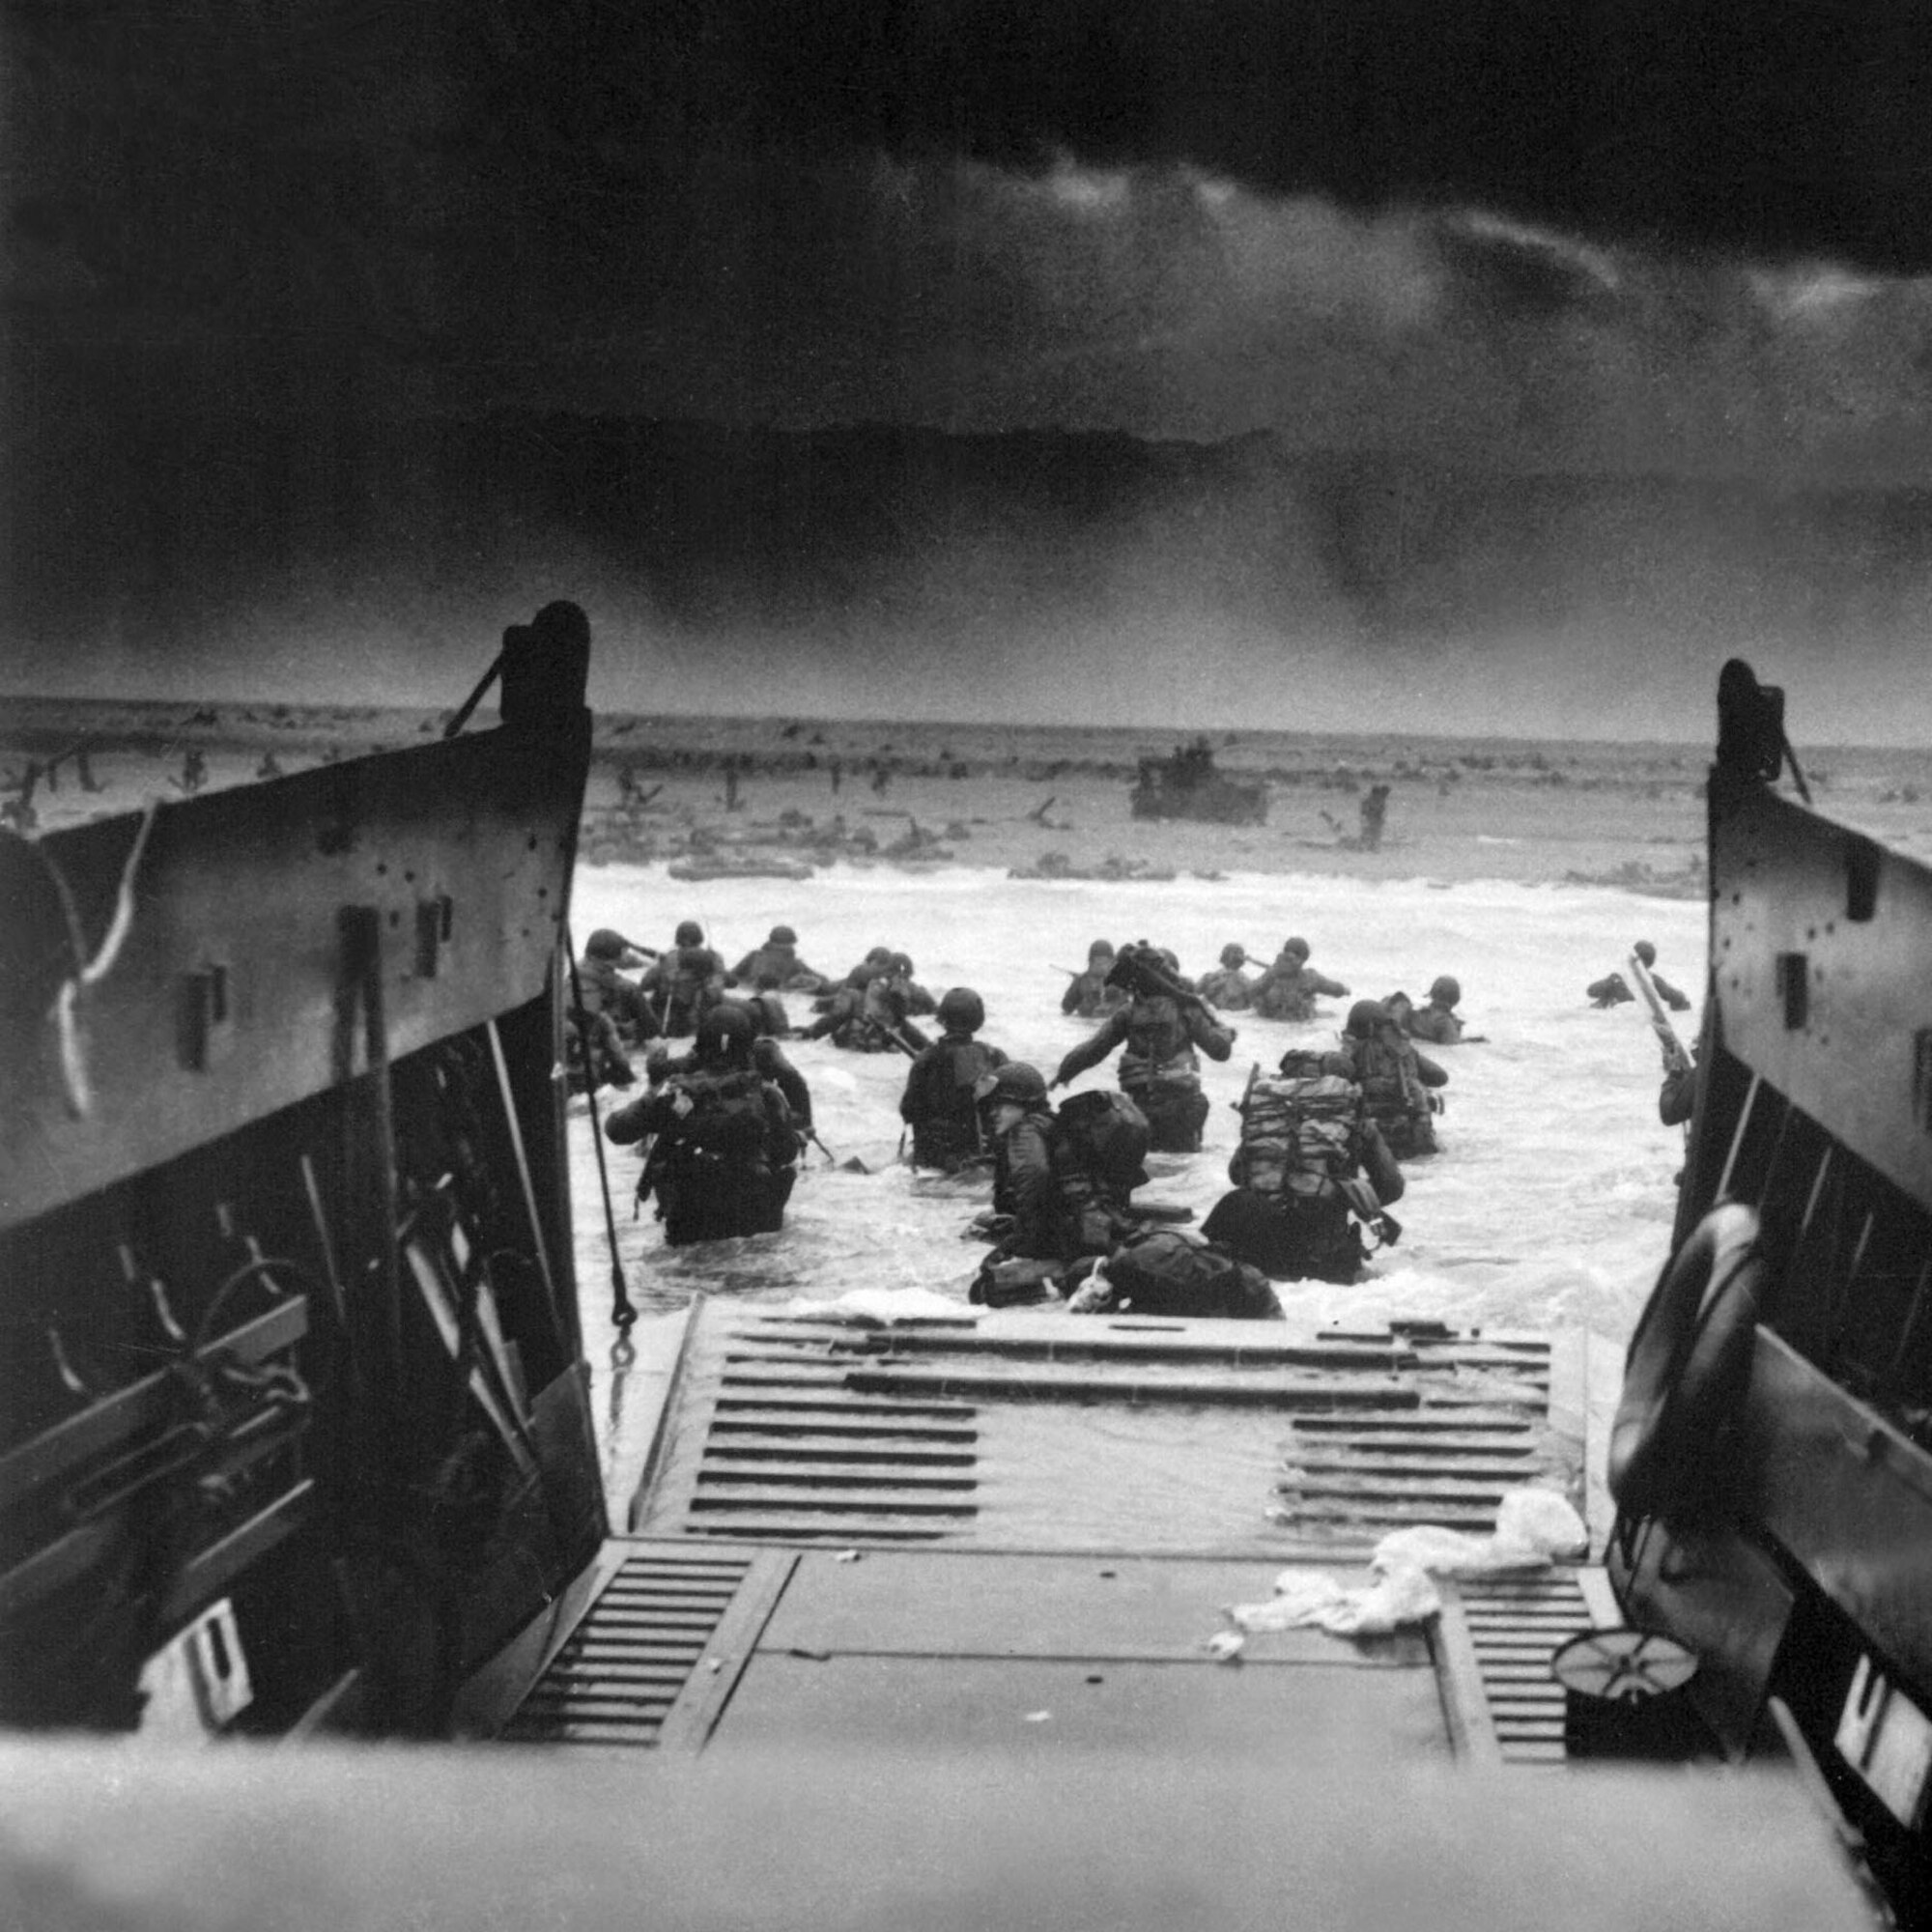 Landing on the coast of France under heavy Nazi machine gun fire are these American soldiers, shown just as they left the ramp of a Coast Guard landing boat, June 6, 1944.  CPhoM. Robert F. Sargent. (Coast Guard)
NARA FILE #:  026-G-2343
WAR & CONFLICT BOOK #: 1041